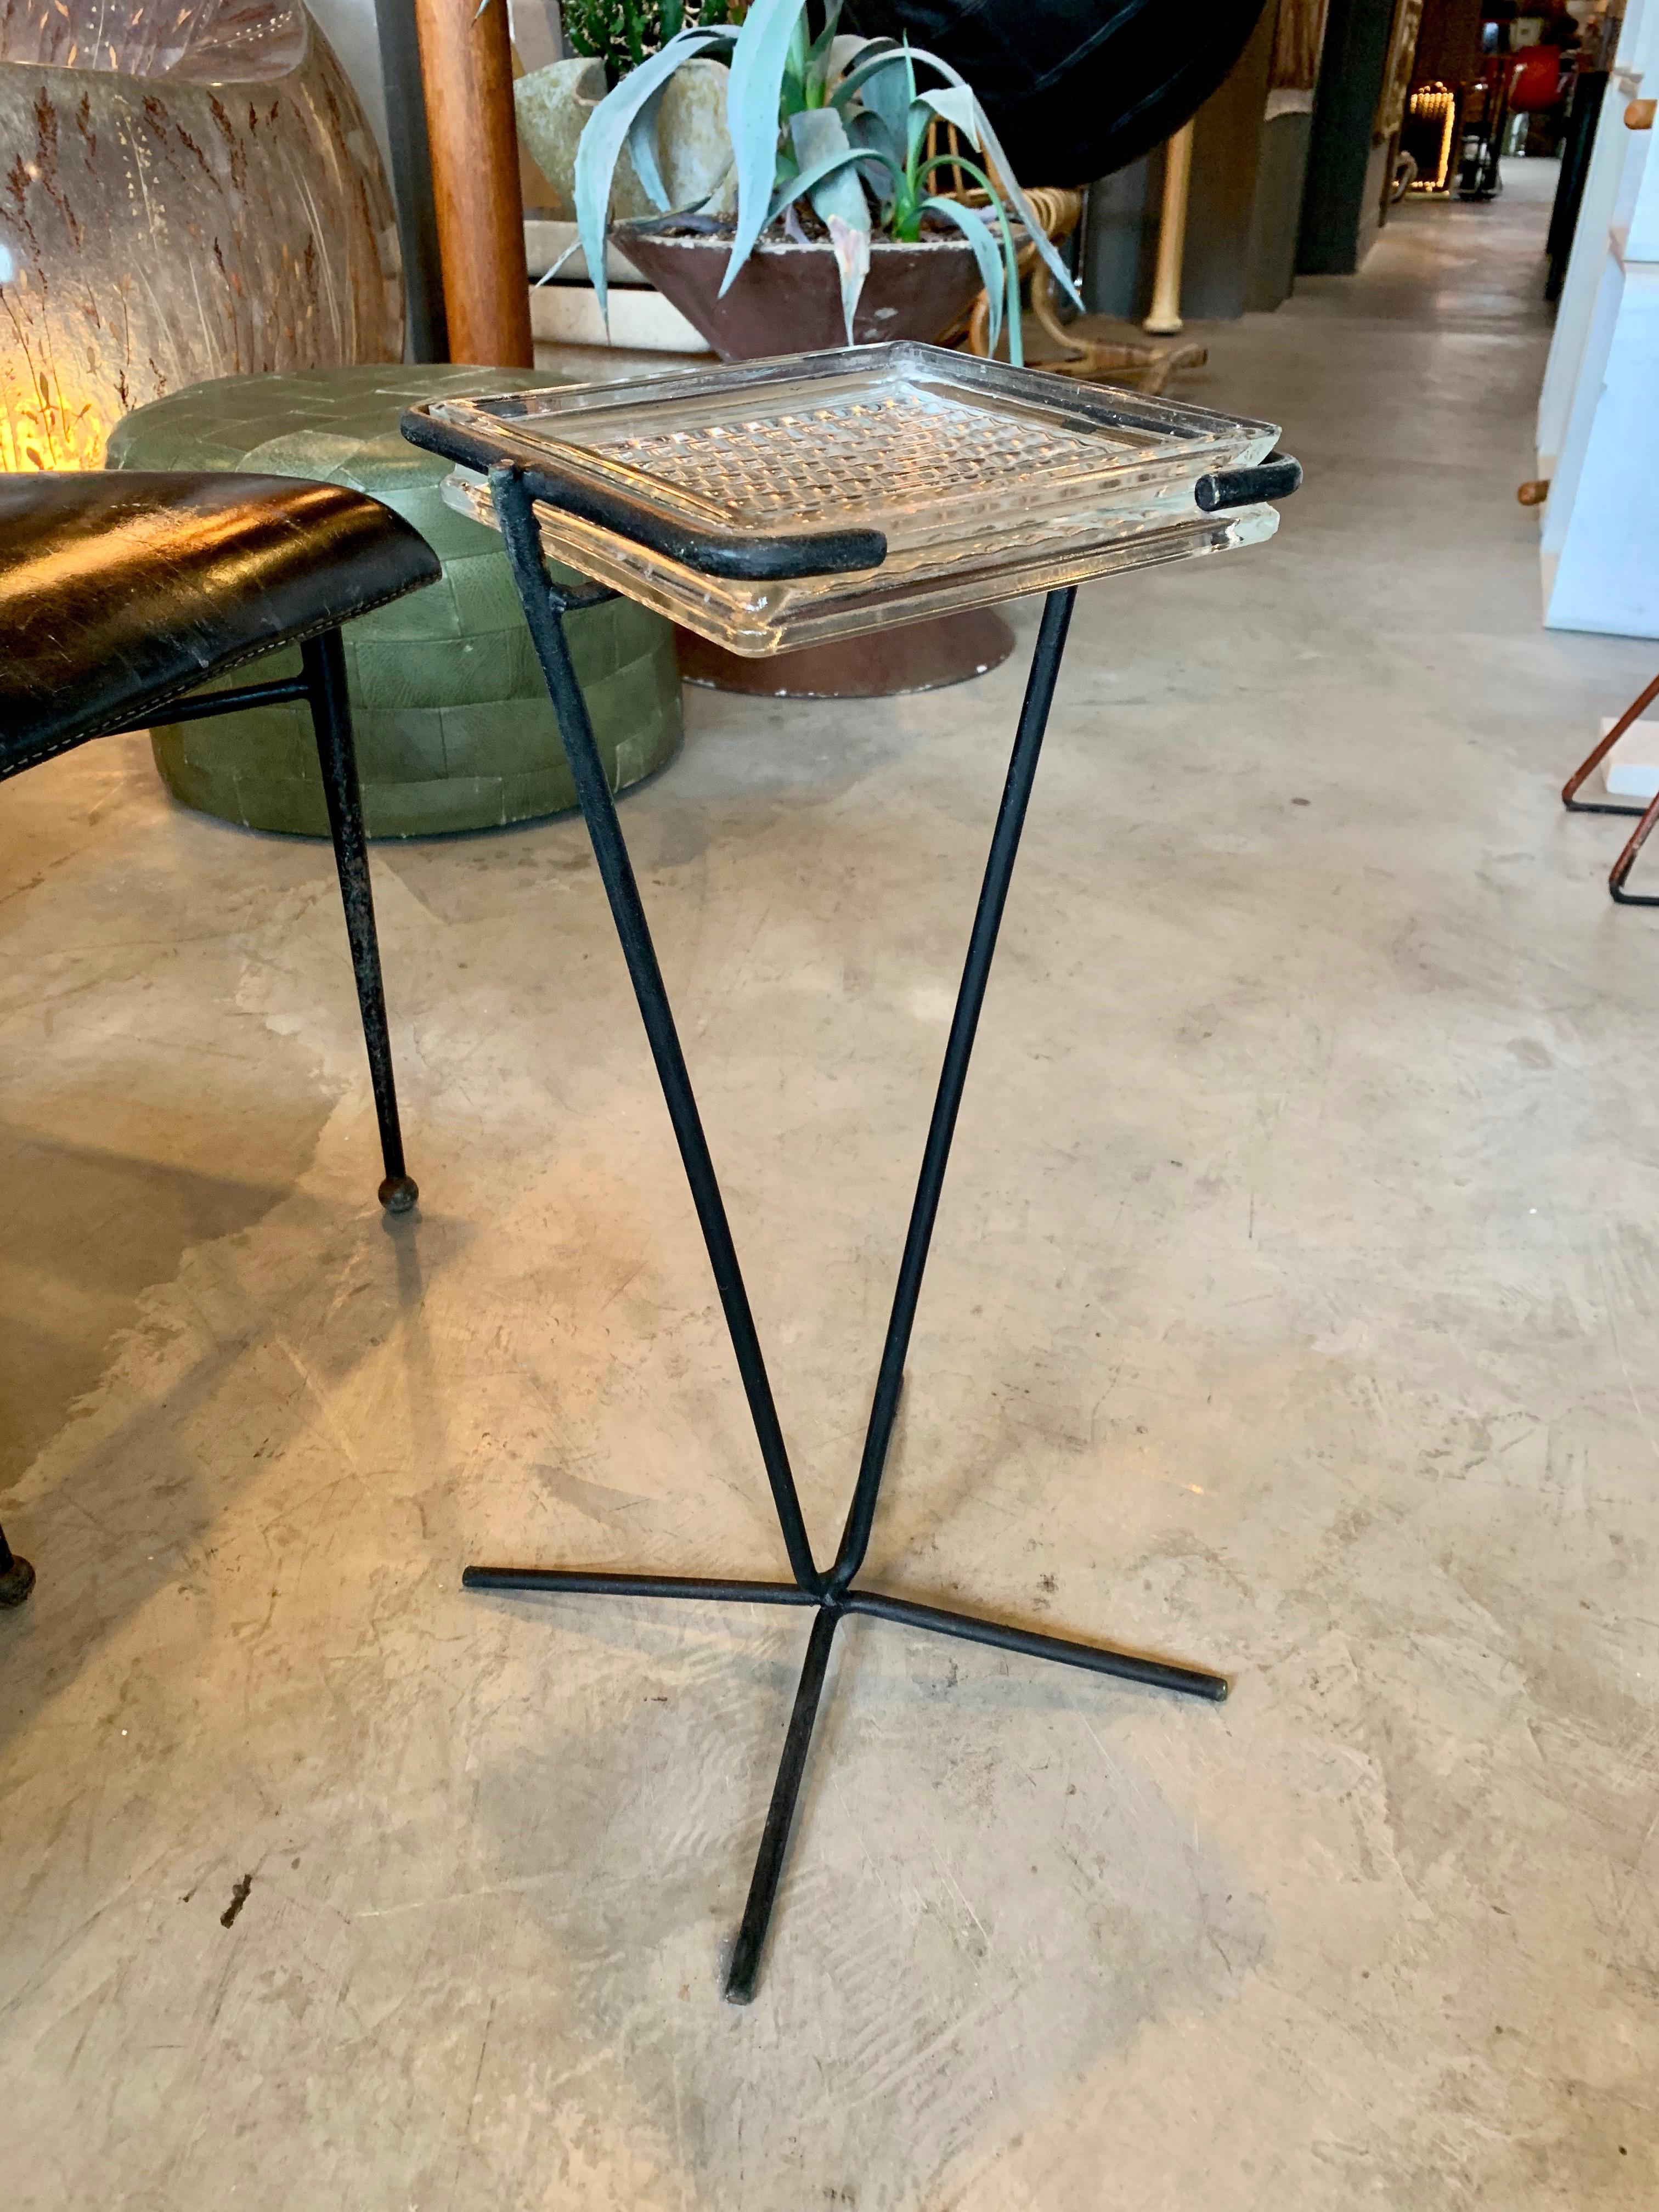 Handsome iron and glass catchall in the style of Jacques Adnet. Sculptural iron frame with tubular legs. Glass dish floats inside. Perfect vide poche/ catchall. Great for keys by the door.